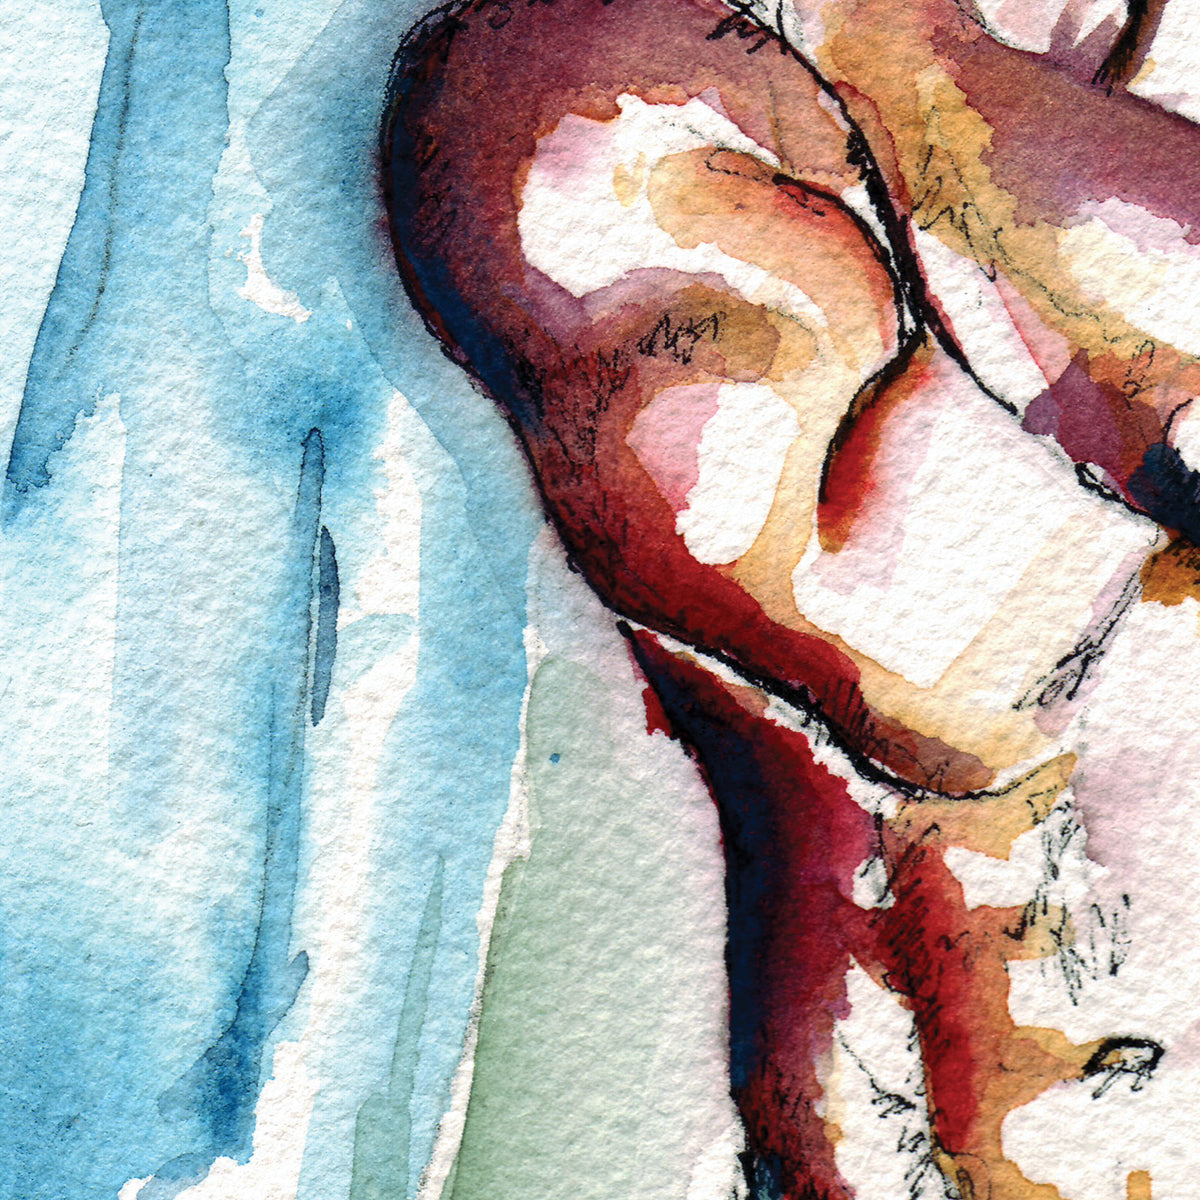 Eyes Closed Full Nude: Muscular Chest in Radiant Watercolor - Giclee Art Print